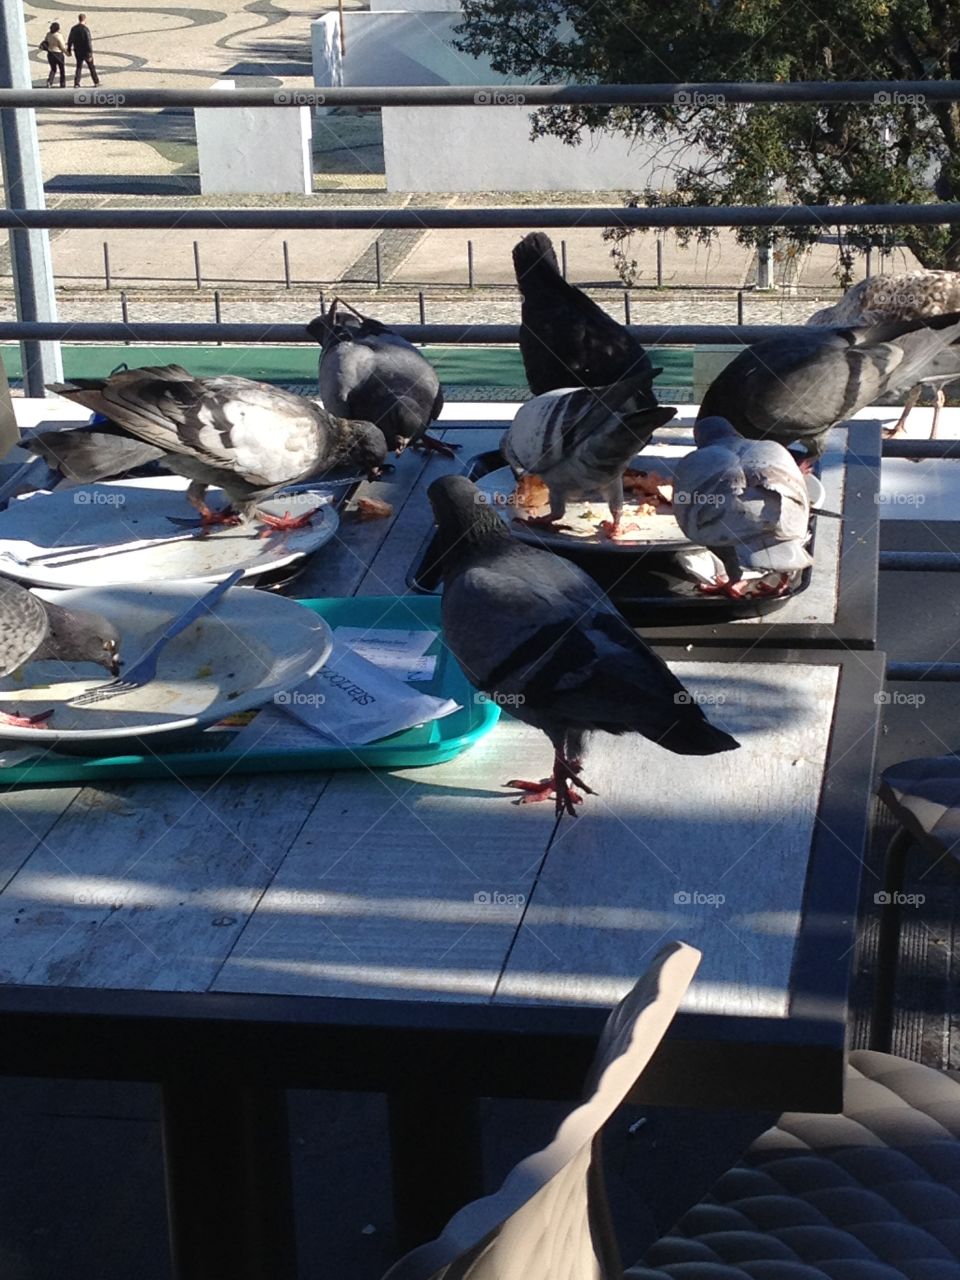 Birds eating their fast food meal in group!